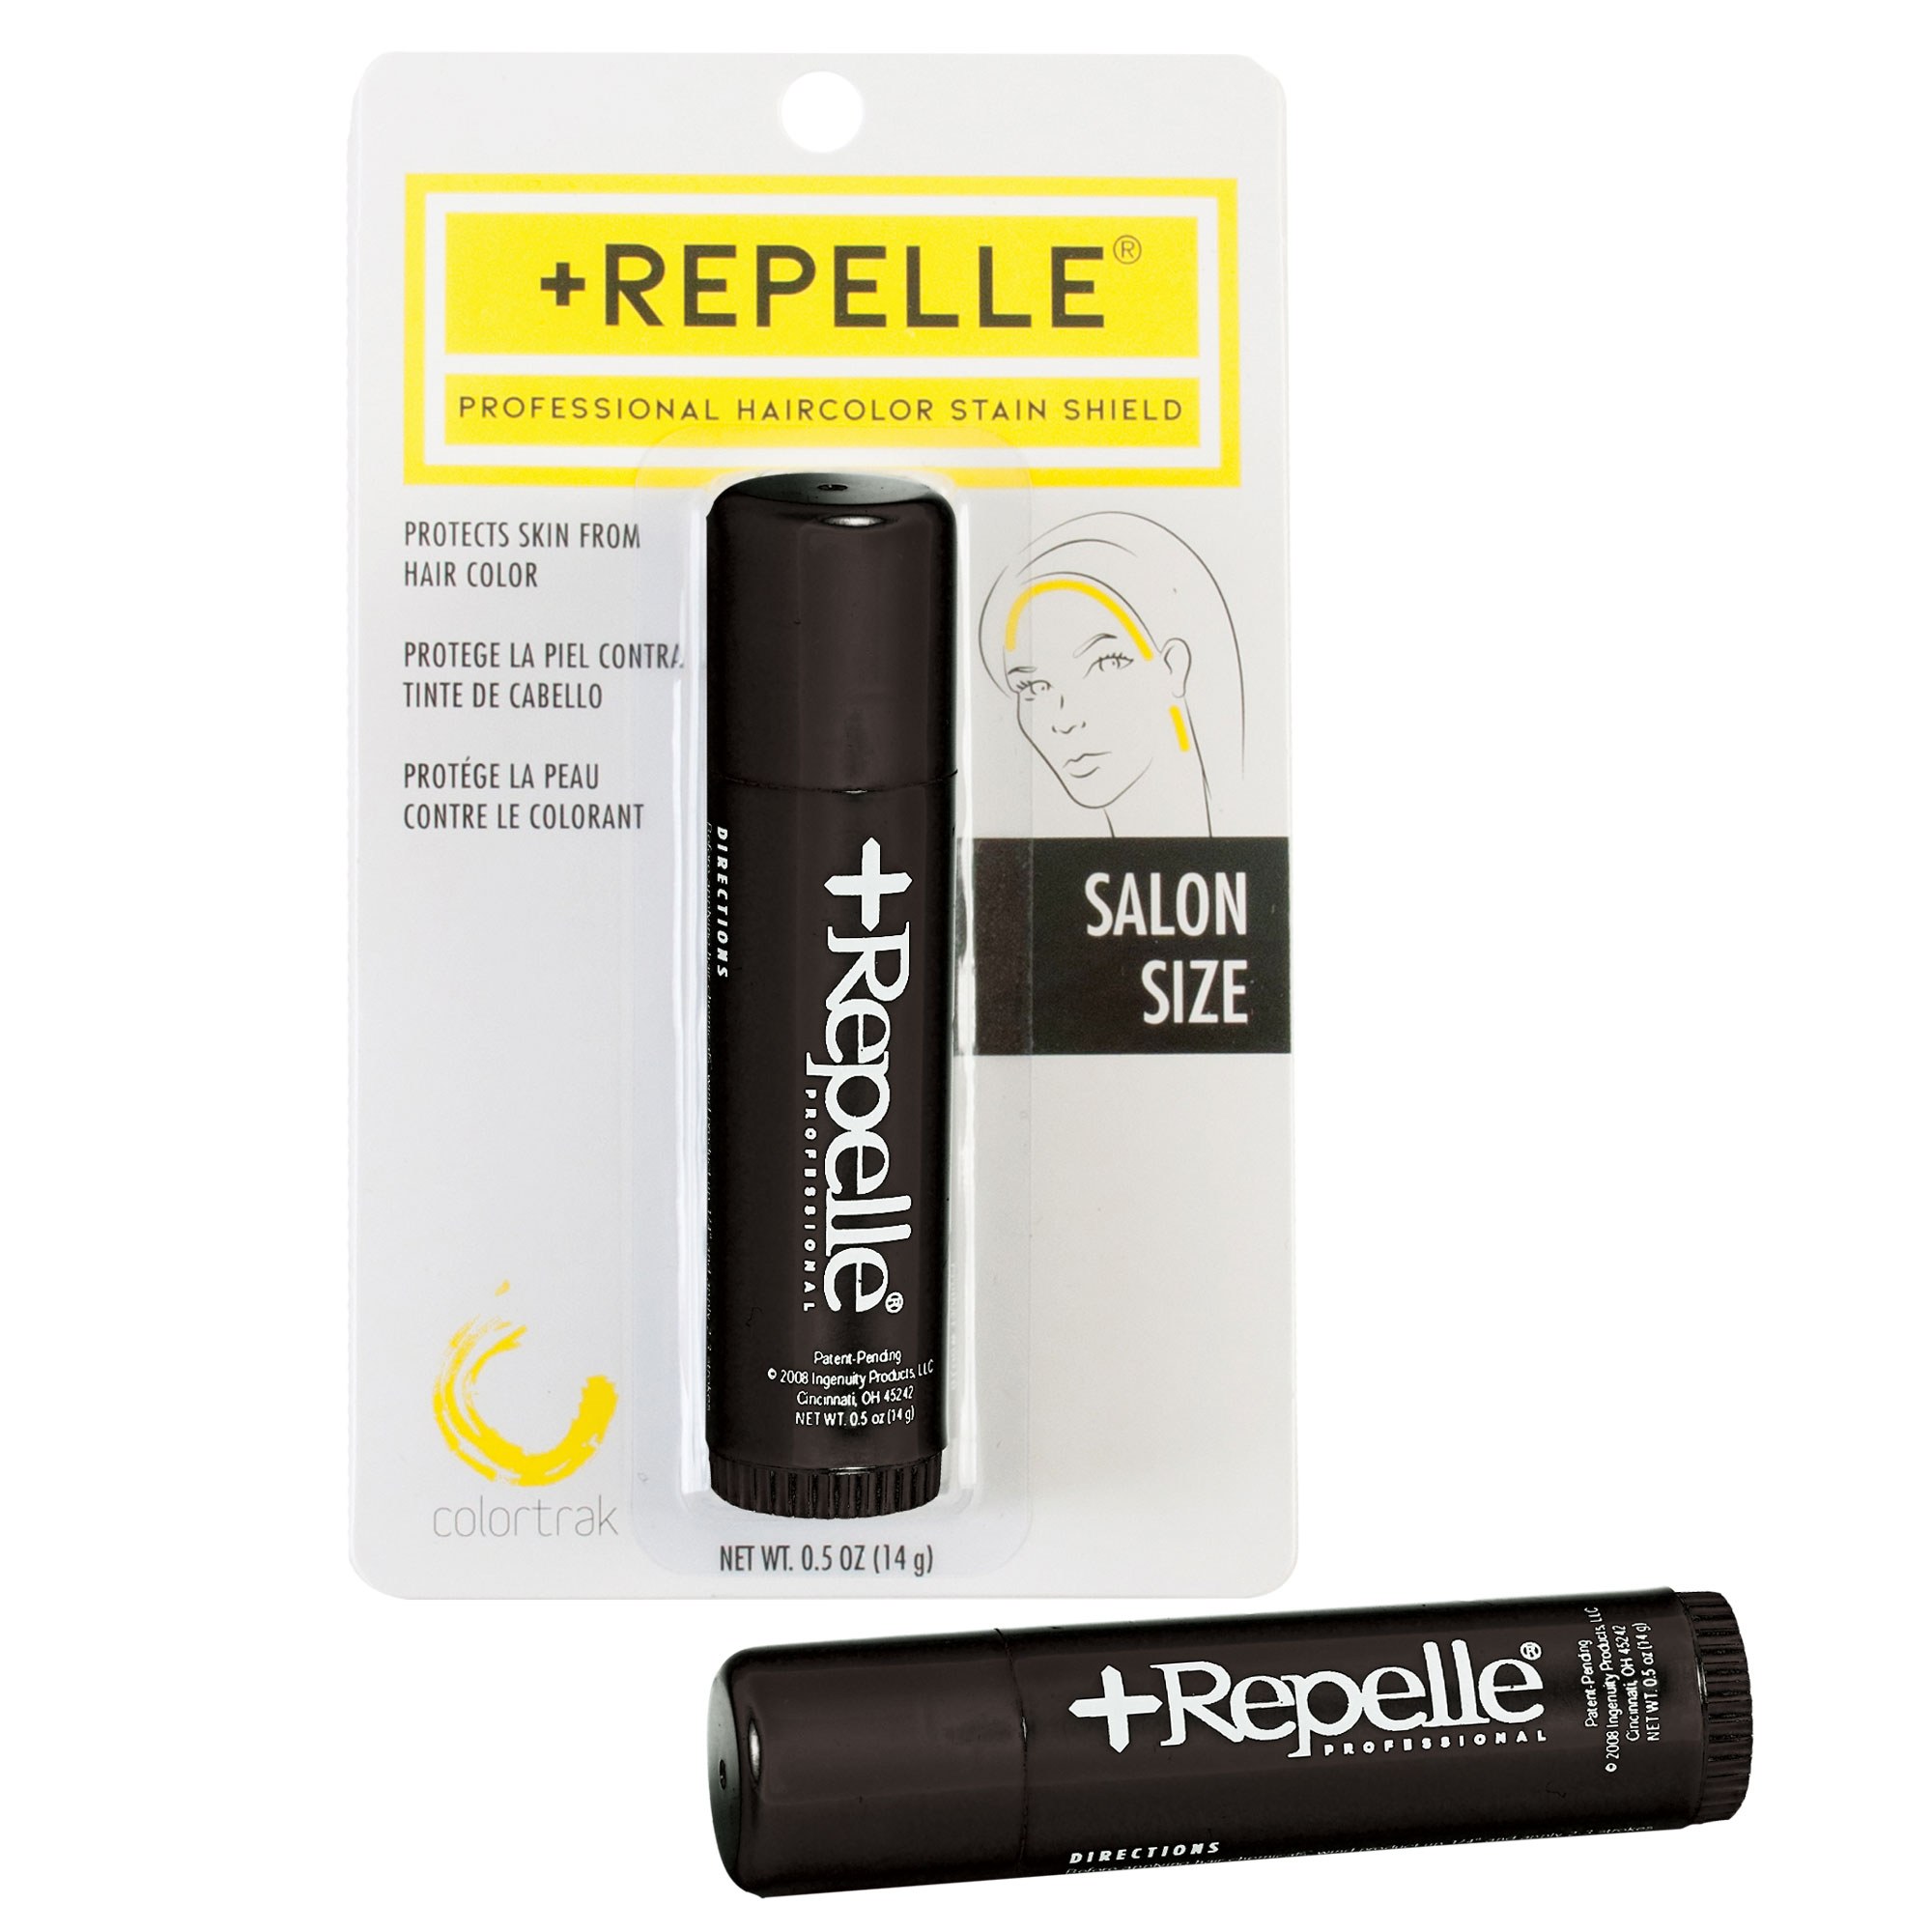 Colortrak Color Tools: Repelle Hair Color Stain Shield